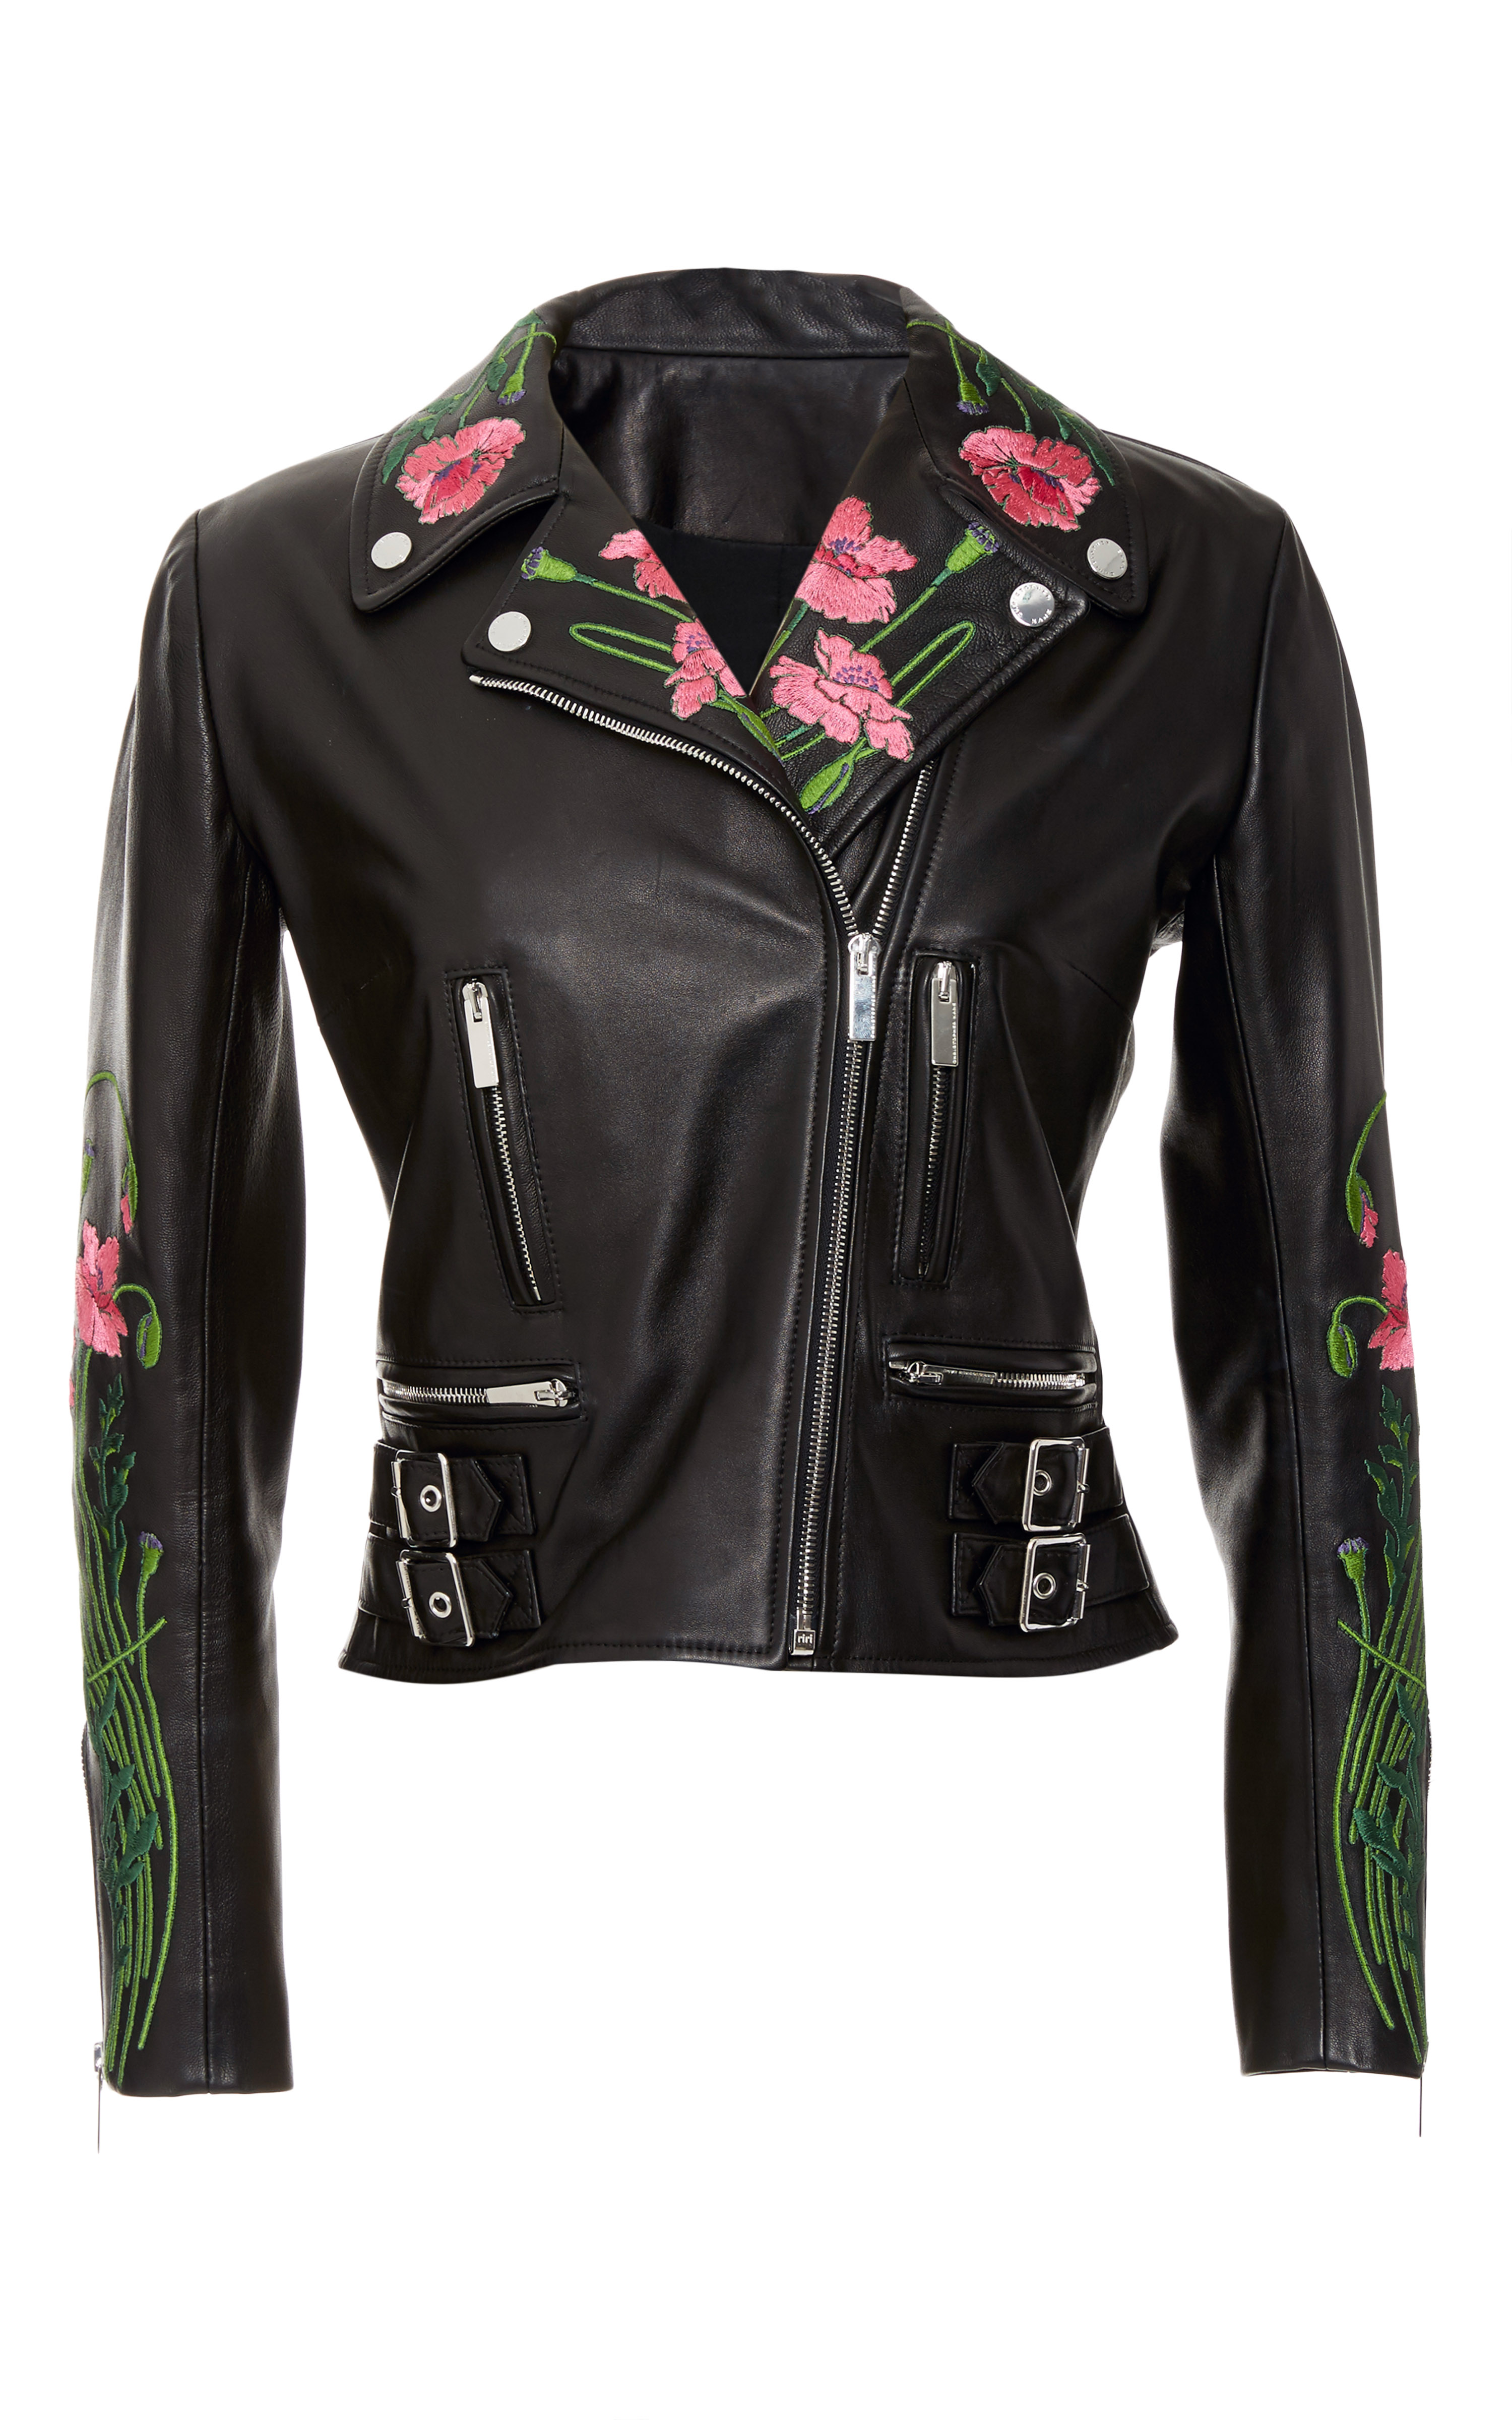 Christopher kane Floral Embroidered Leather Jacket in Black | Lyst